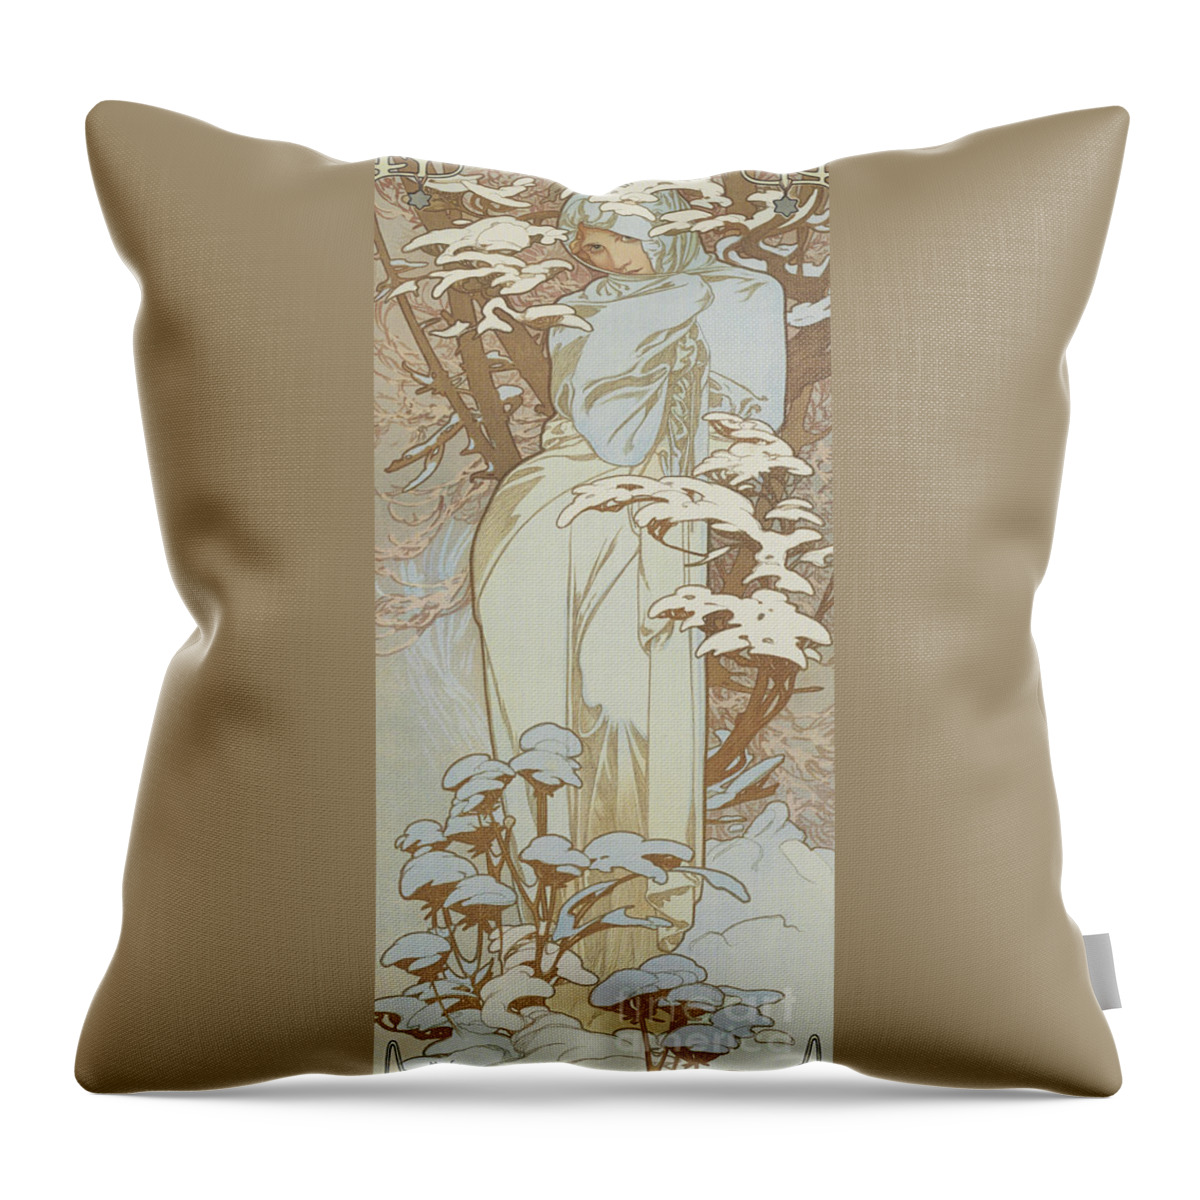 Wintry Throw Pillow featuring the painting Four Seasons Winter, 1900 by Alphonse Marie Mucha